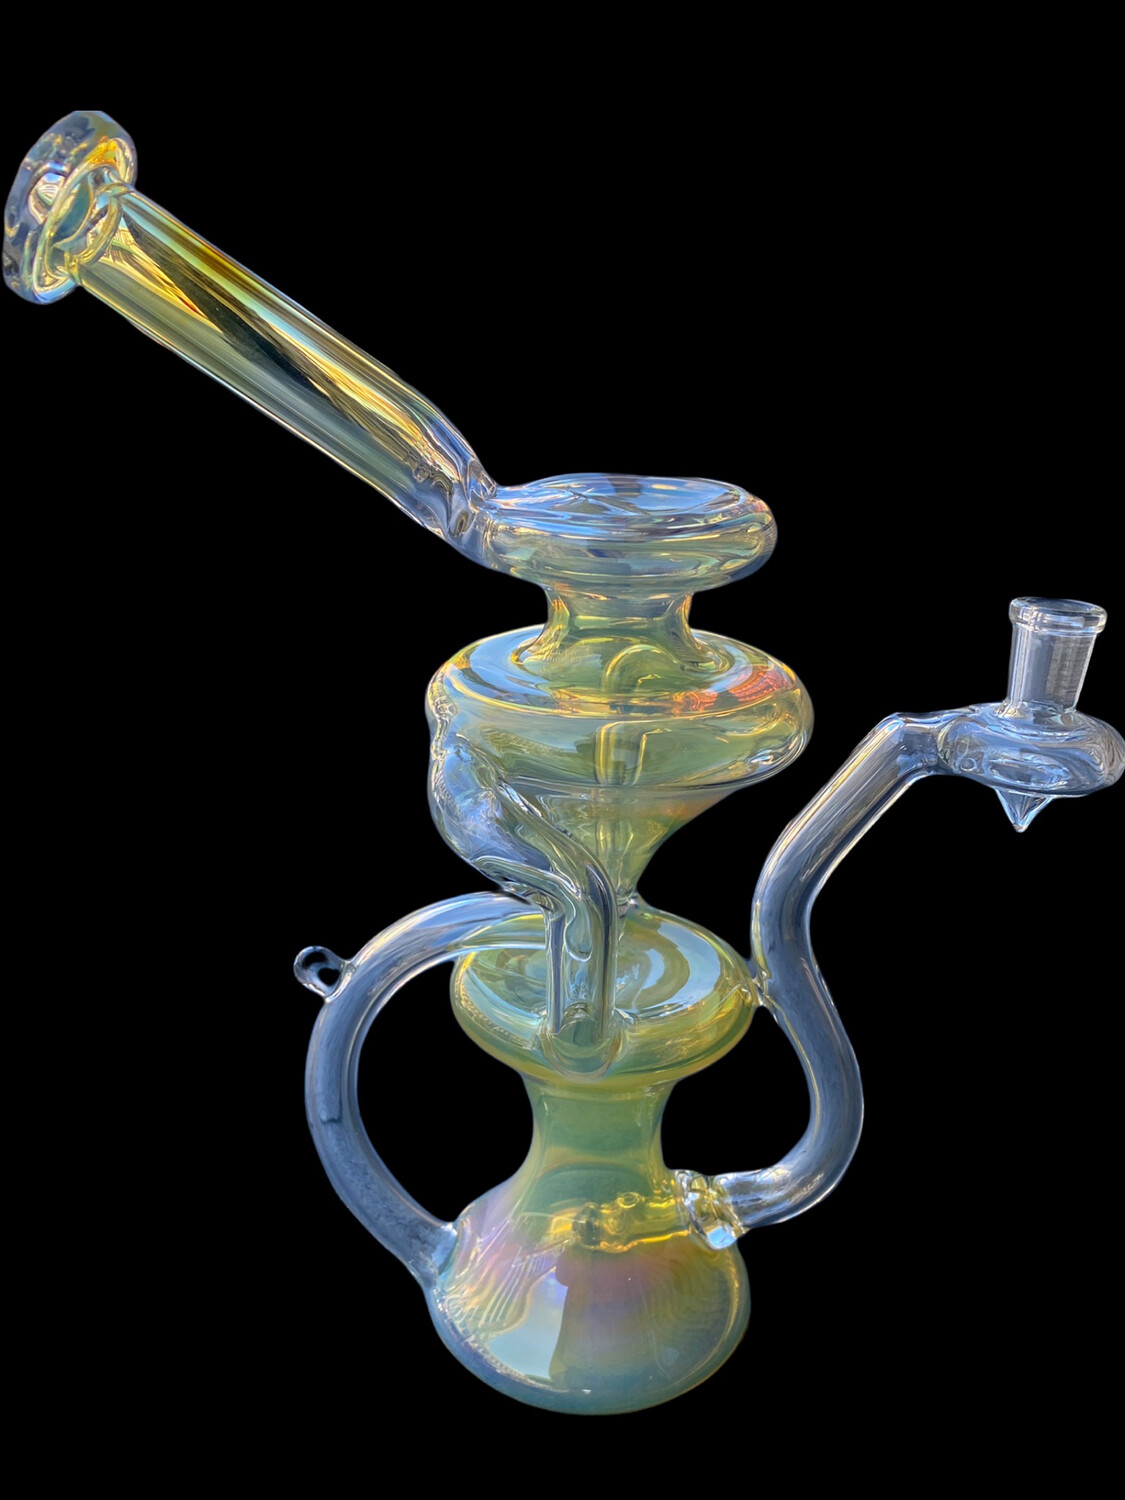 Dale’s Headies Fumed With Opal 10” Recycler Rig #6